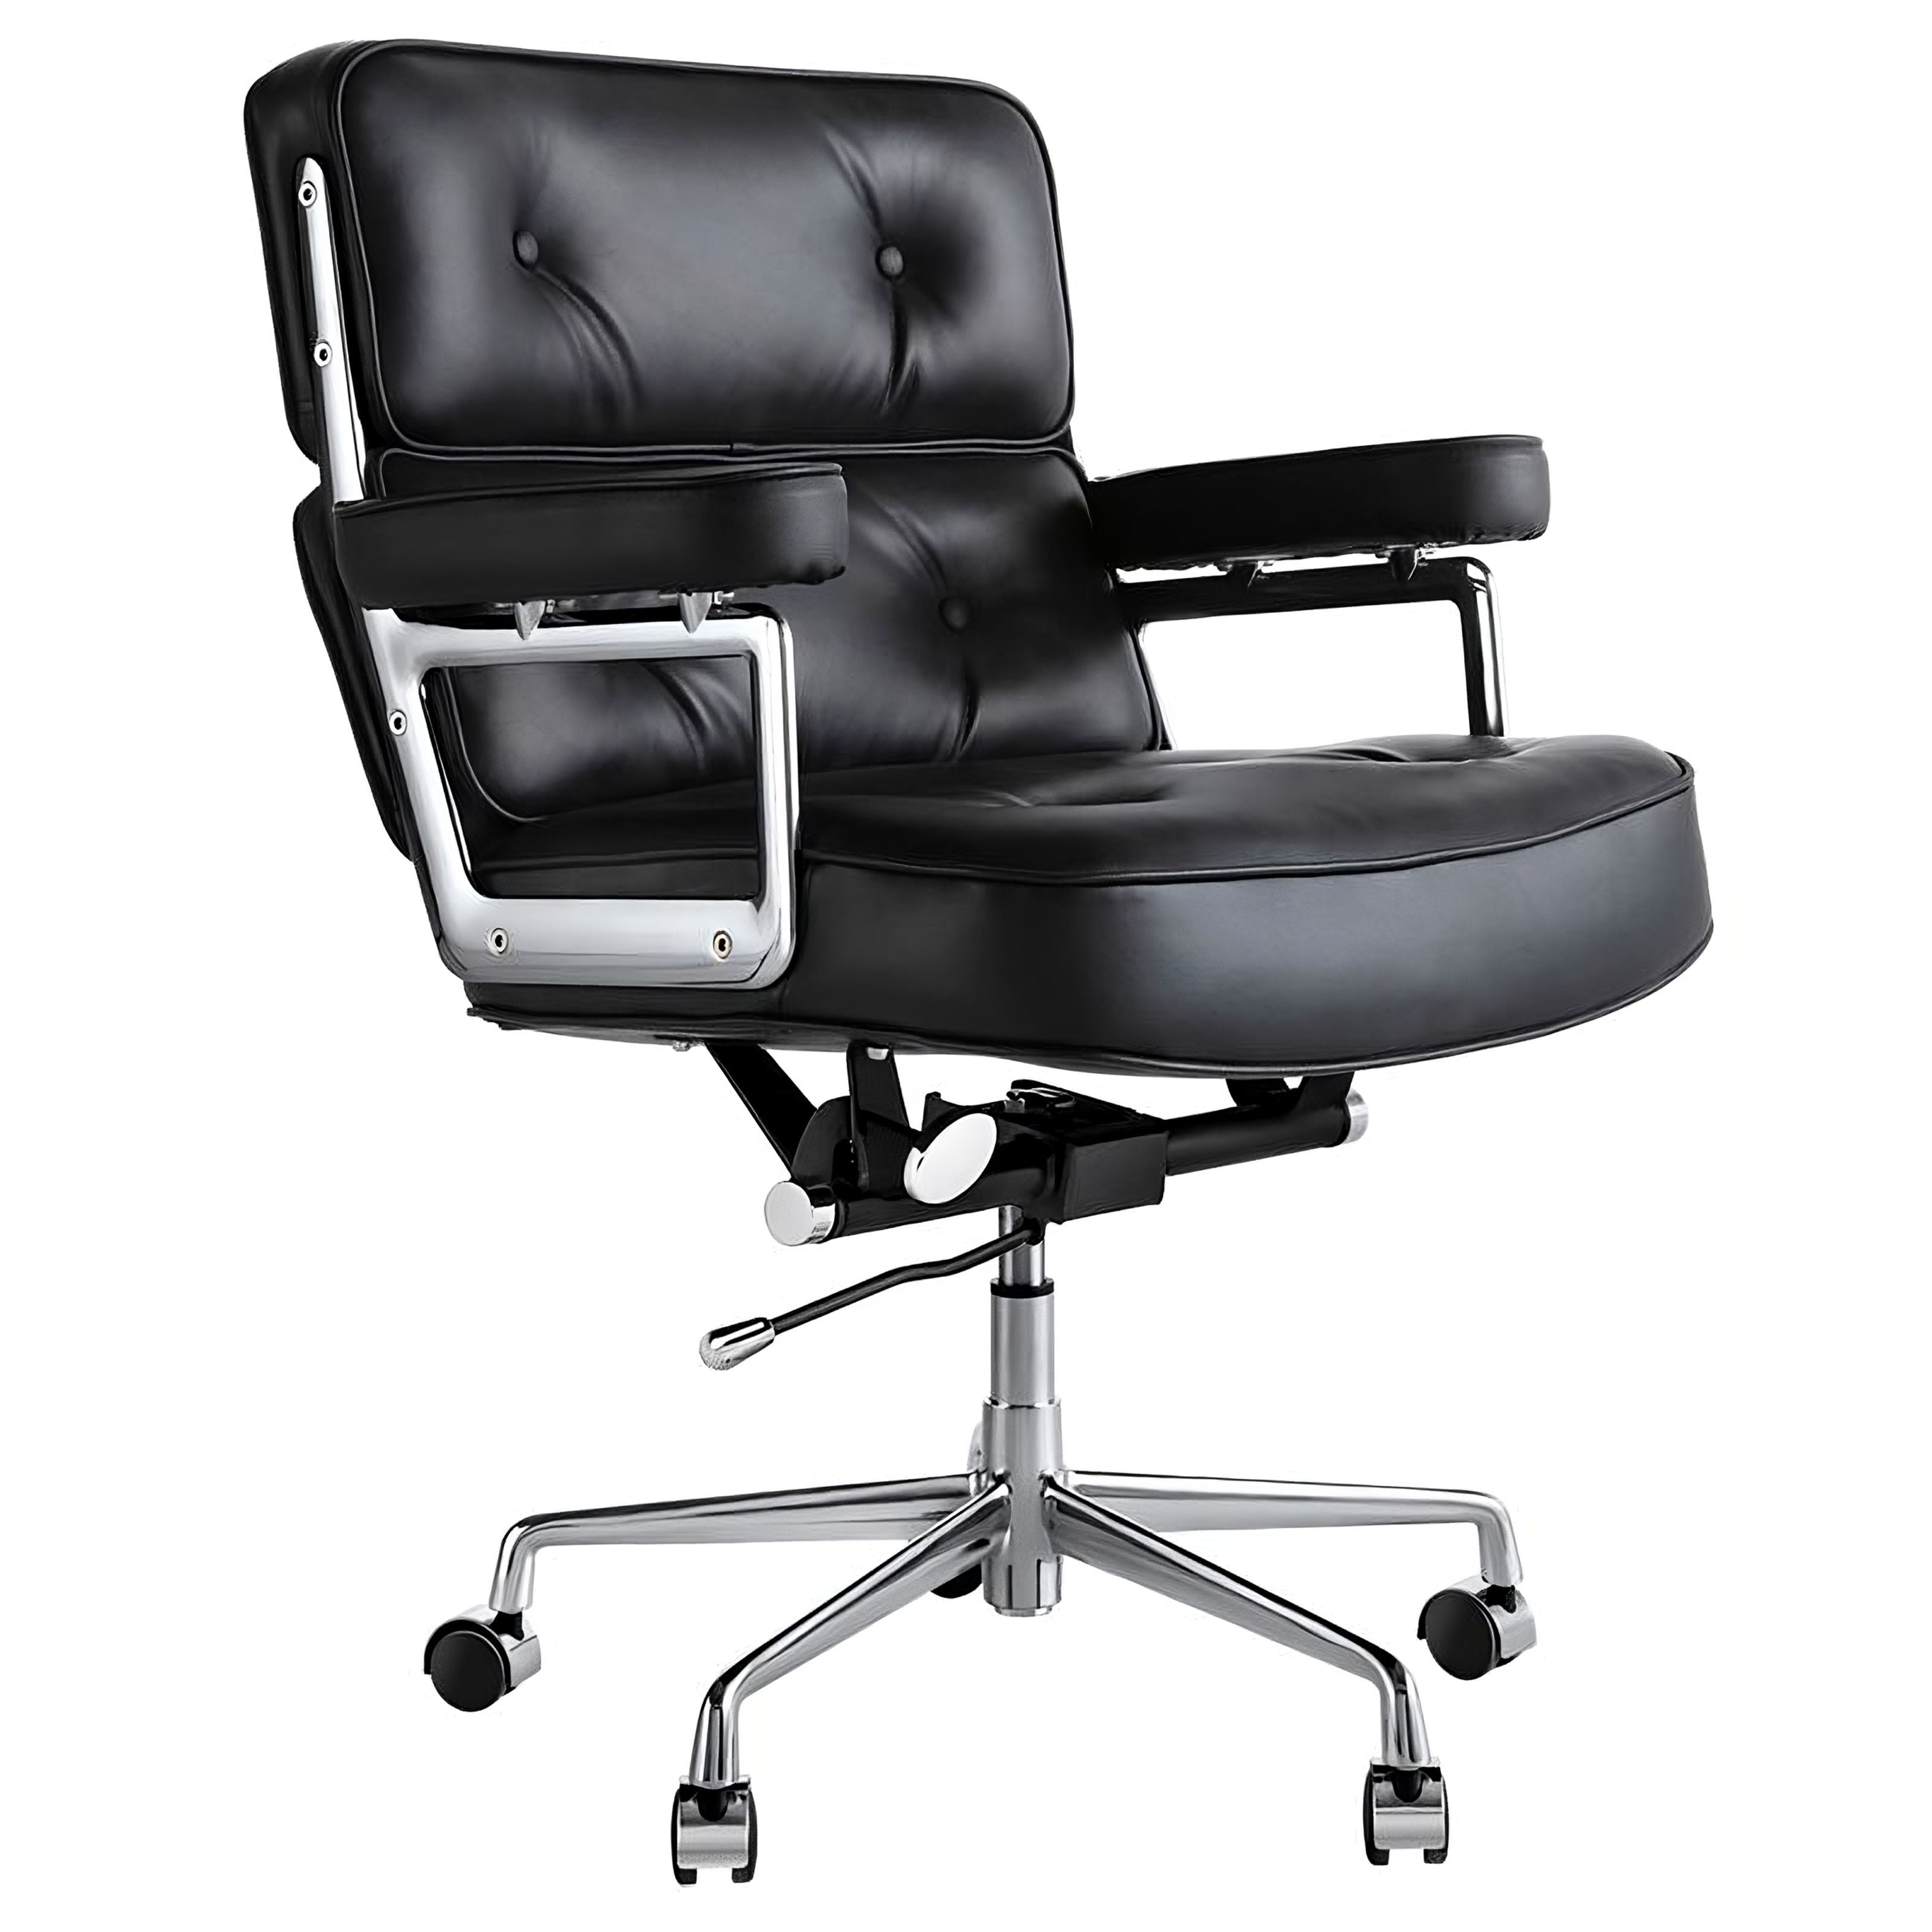 Charles and Ray Eames Time-Life Executive Office Chair, Full-Grain Leather and Steel